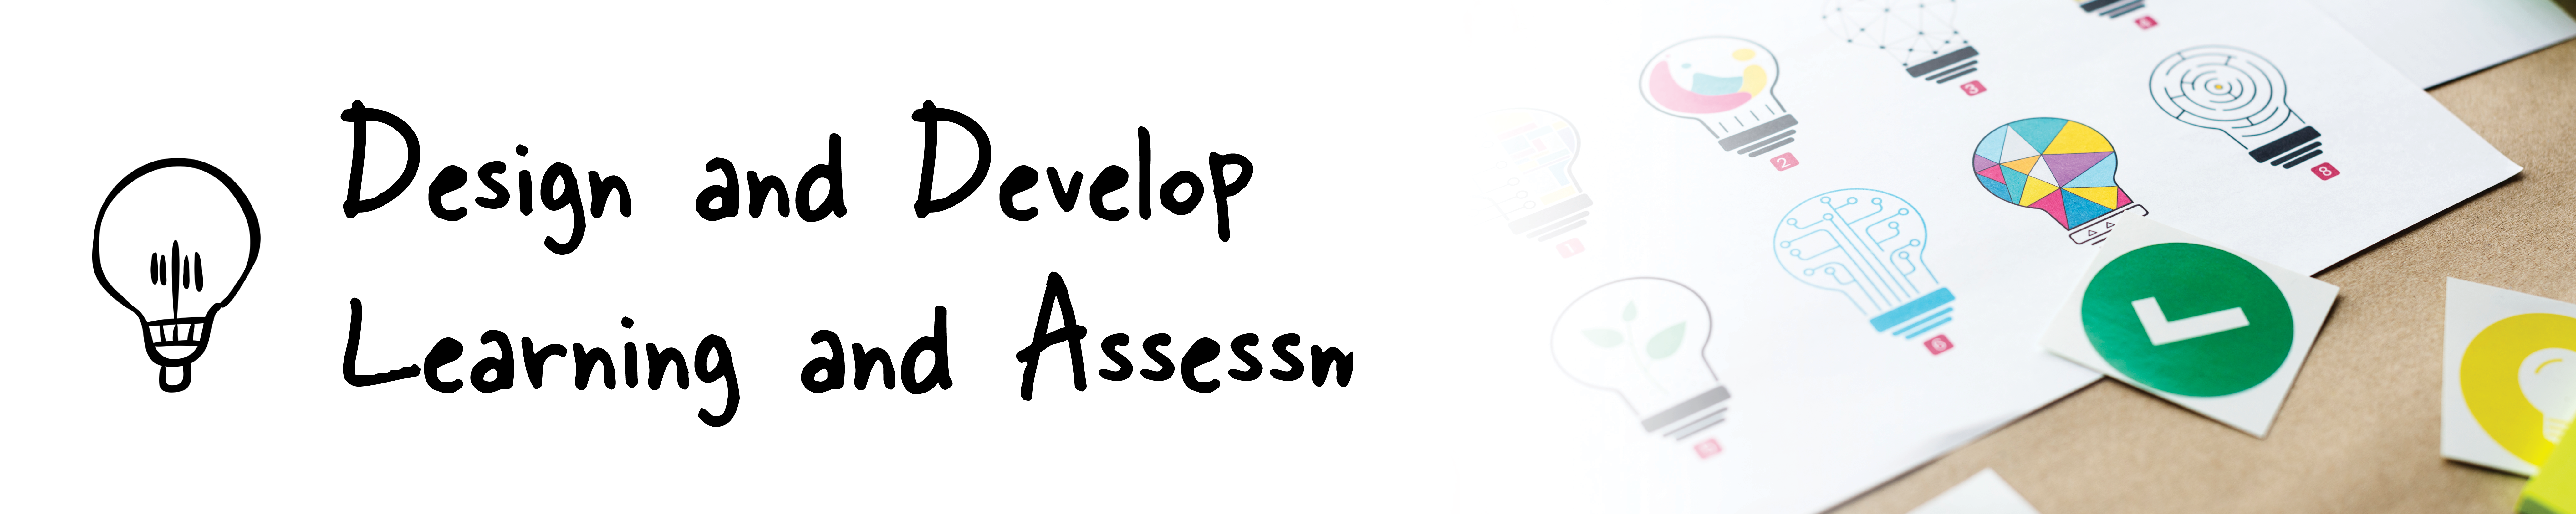 Design and Develop Learning and Assessment